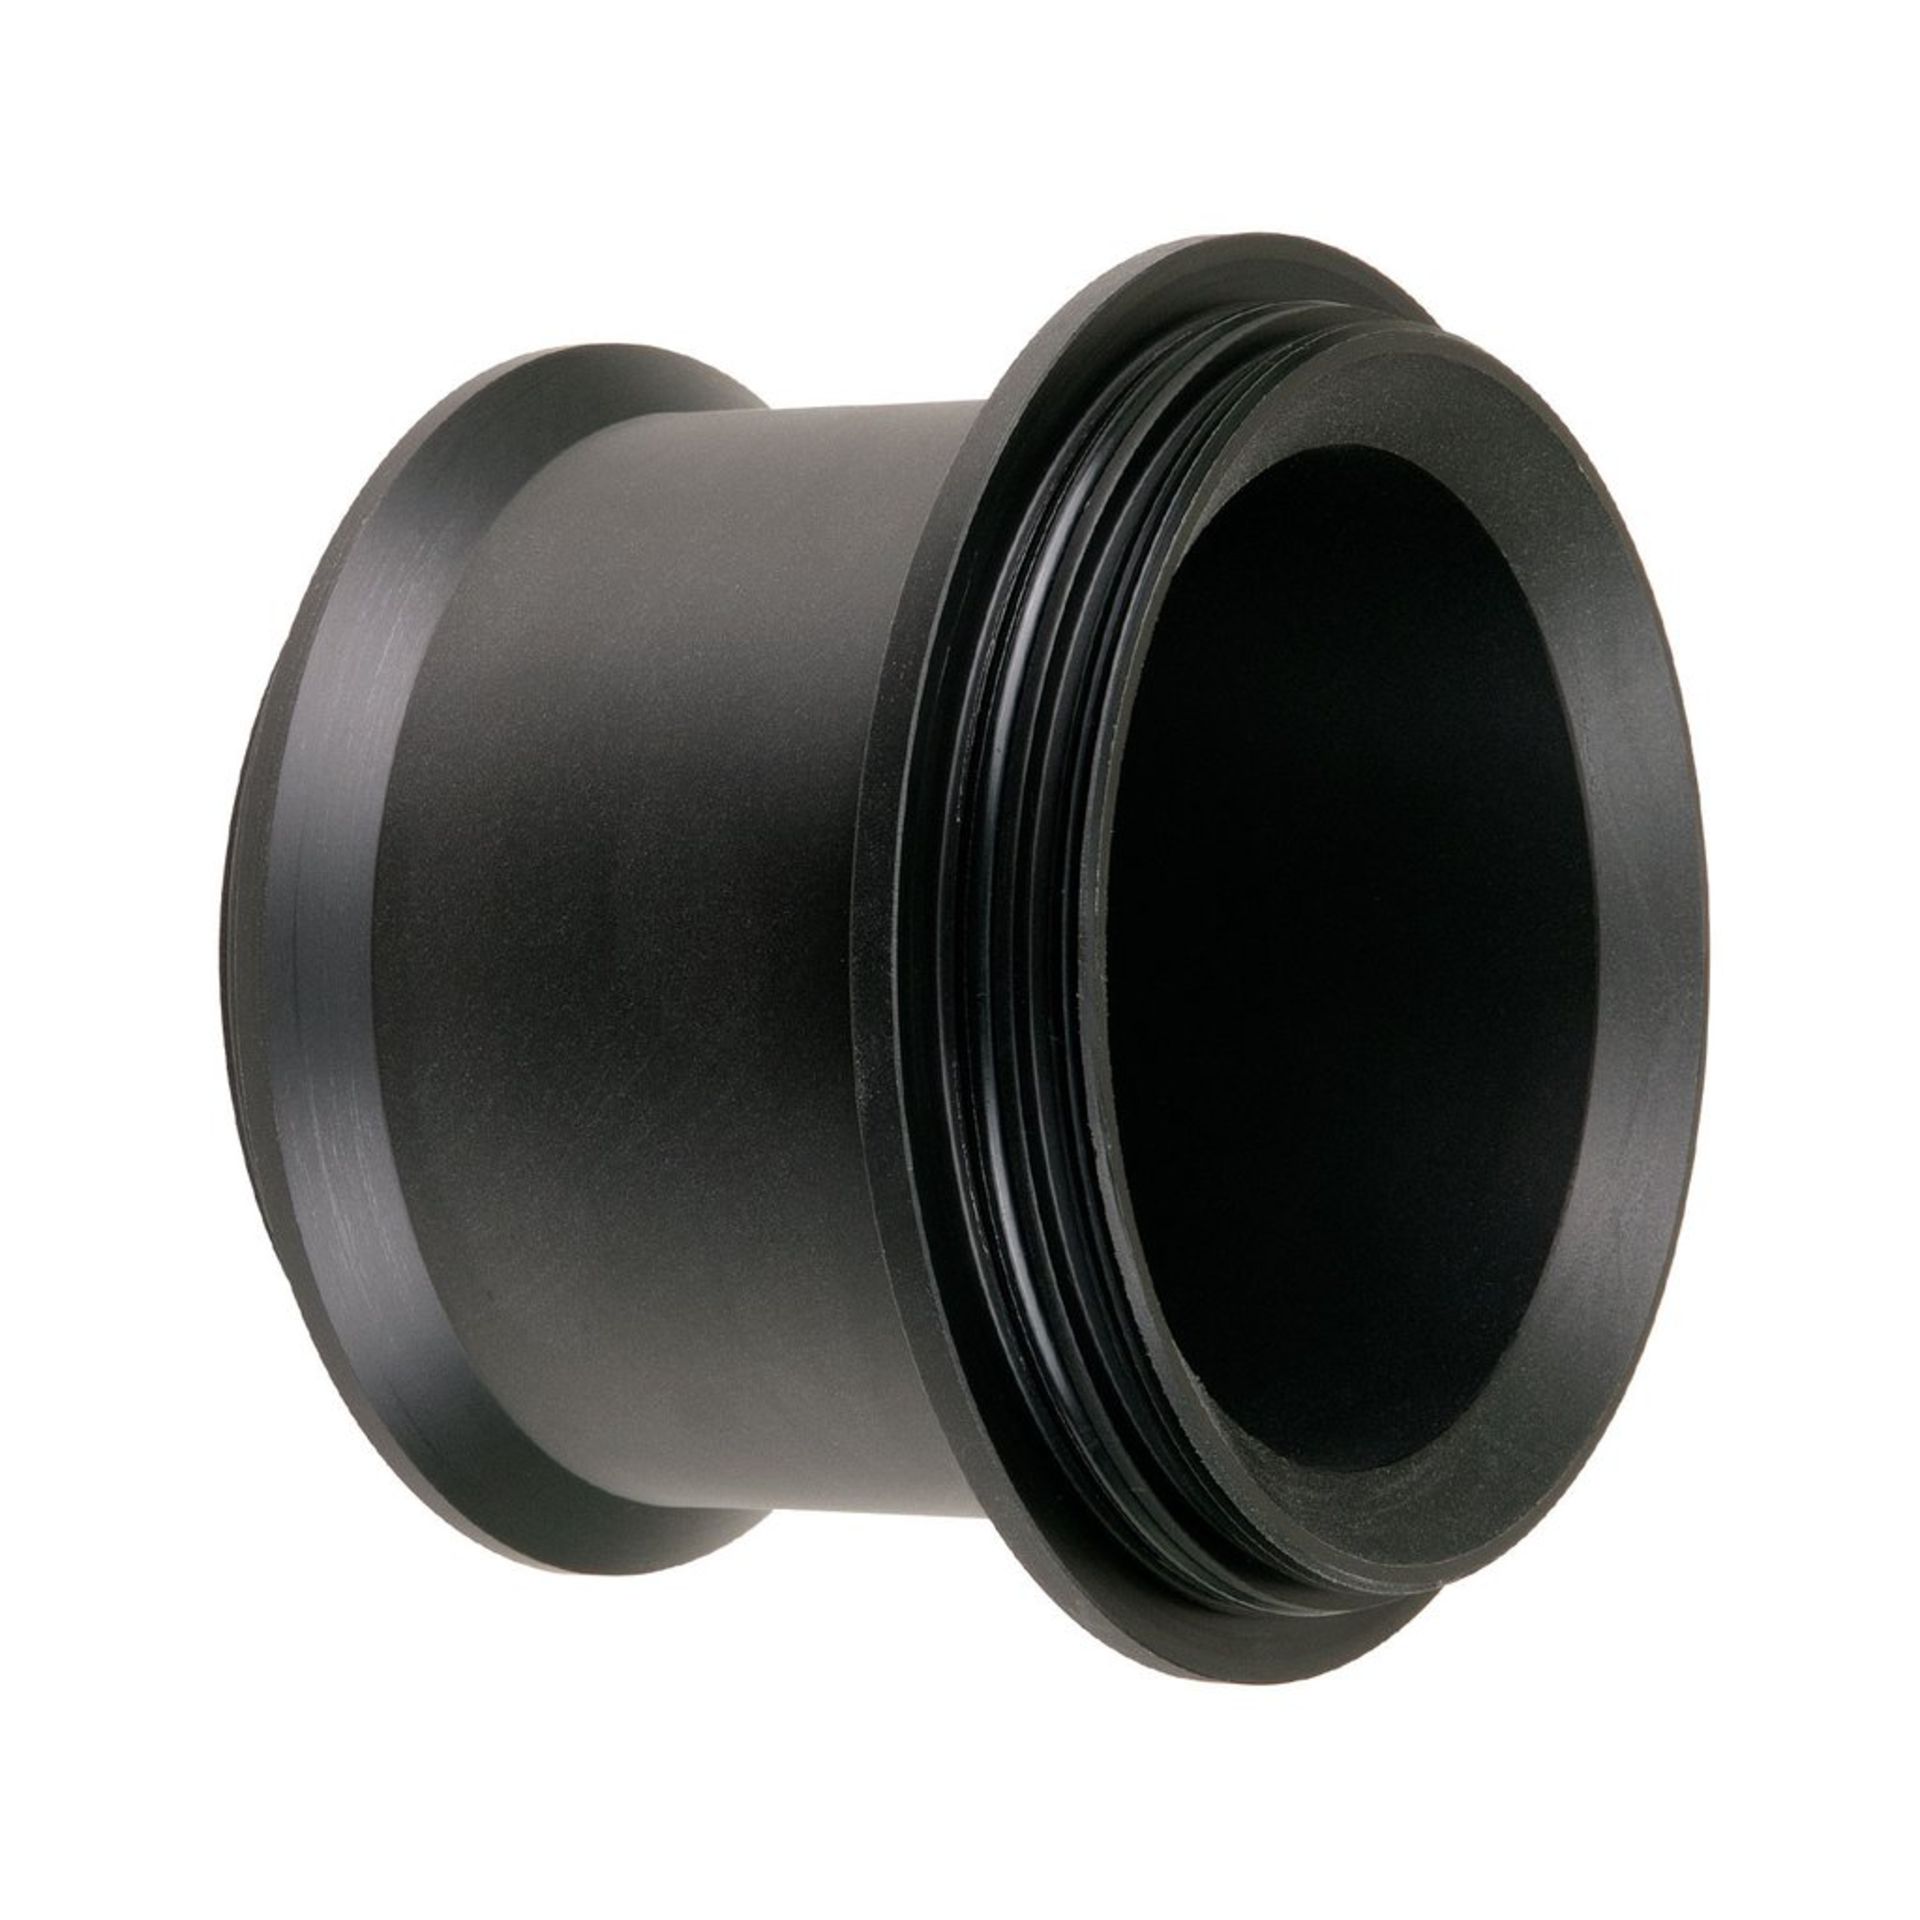 IKELITE FL Port Extension for Lenses Up To 4.125 Inches PRODUCT 5510.22